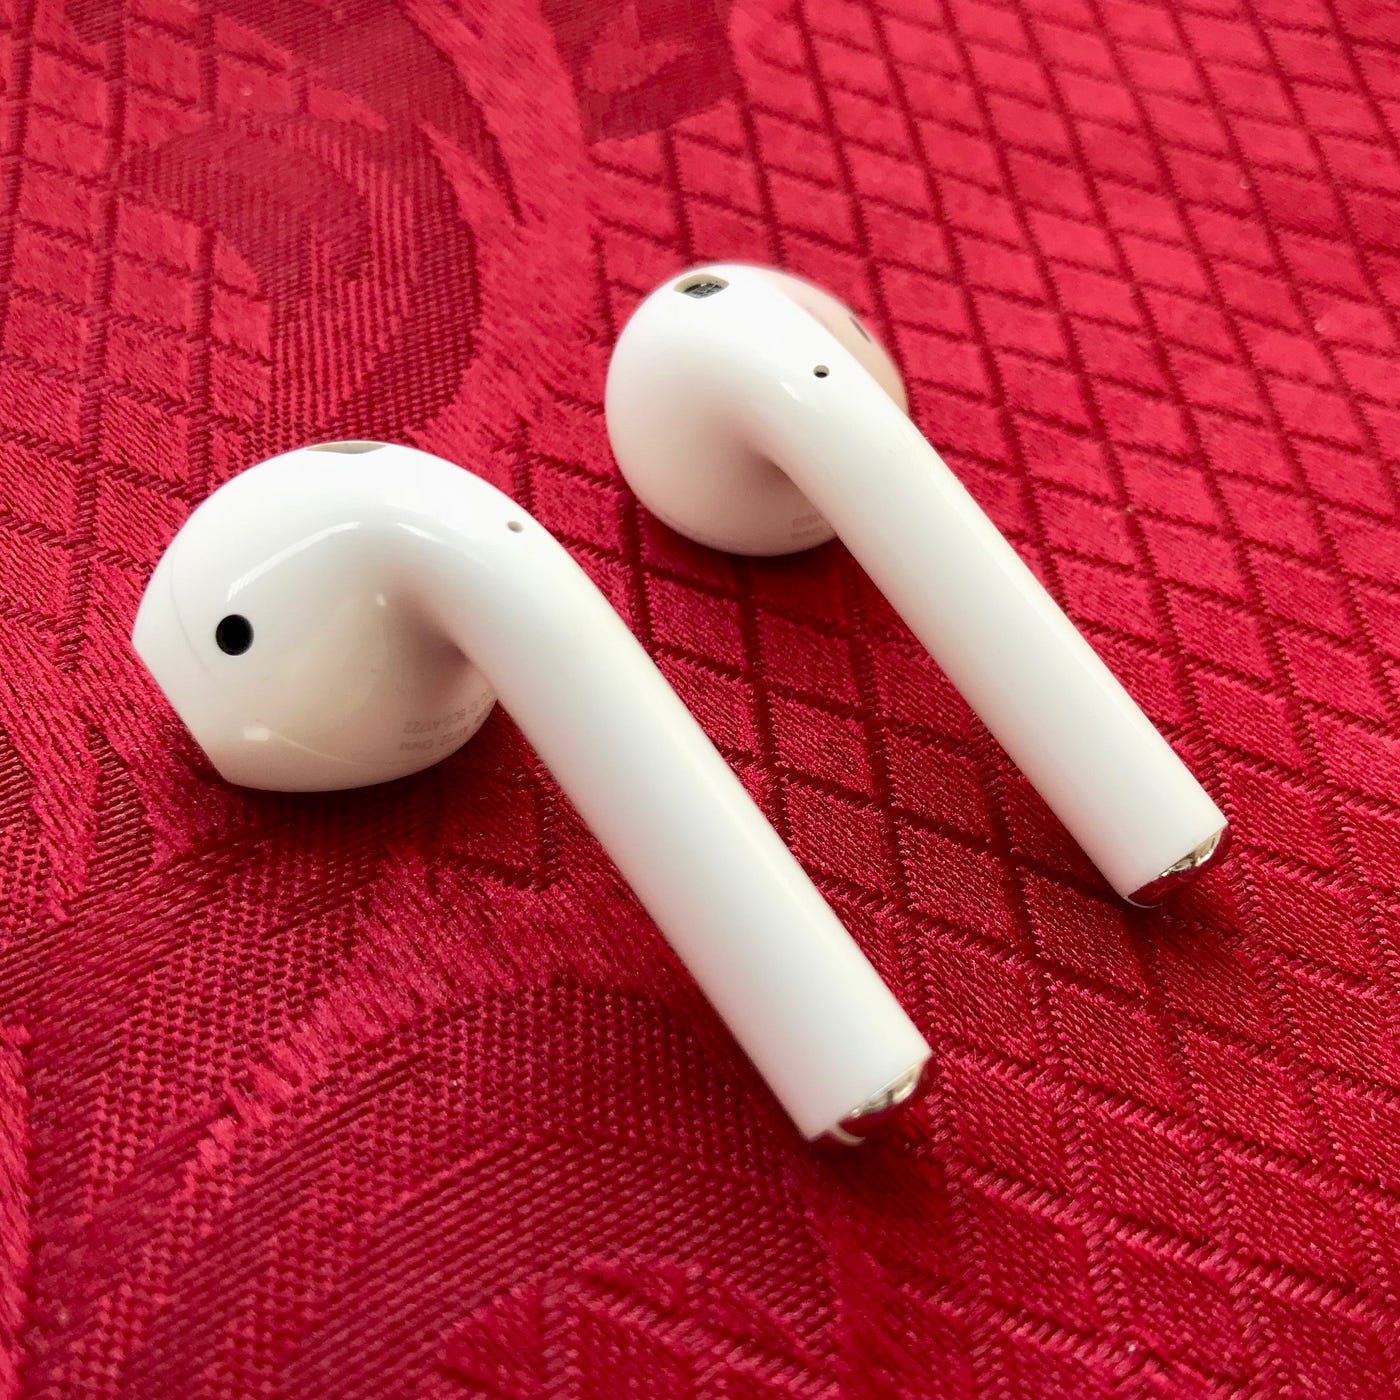 A perfect hack if Apples earphones don't fit your ears